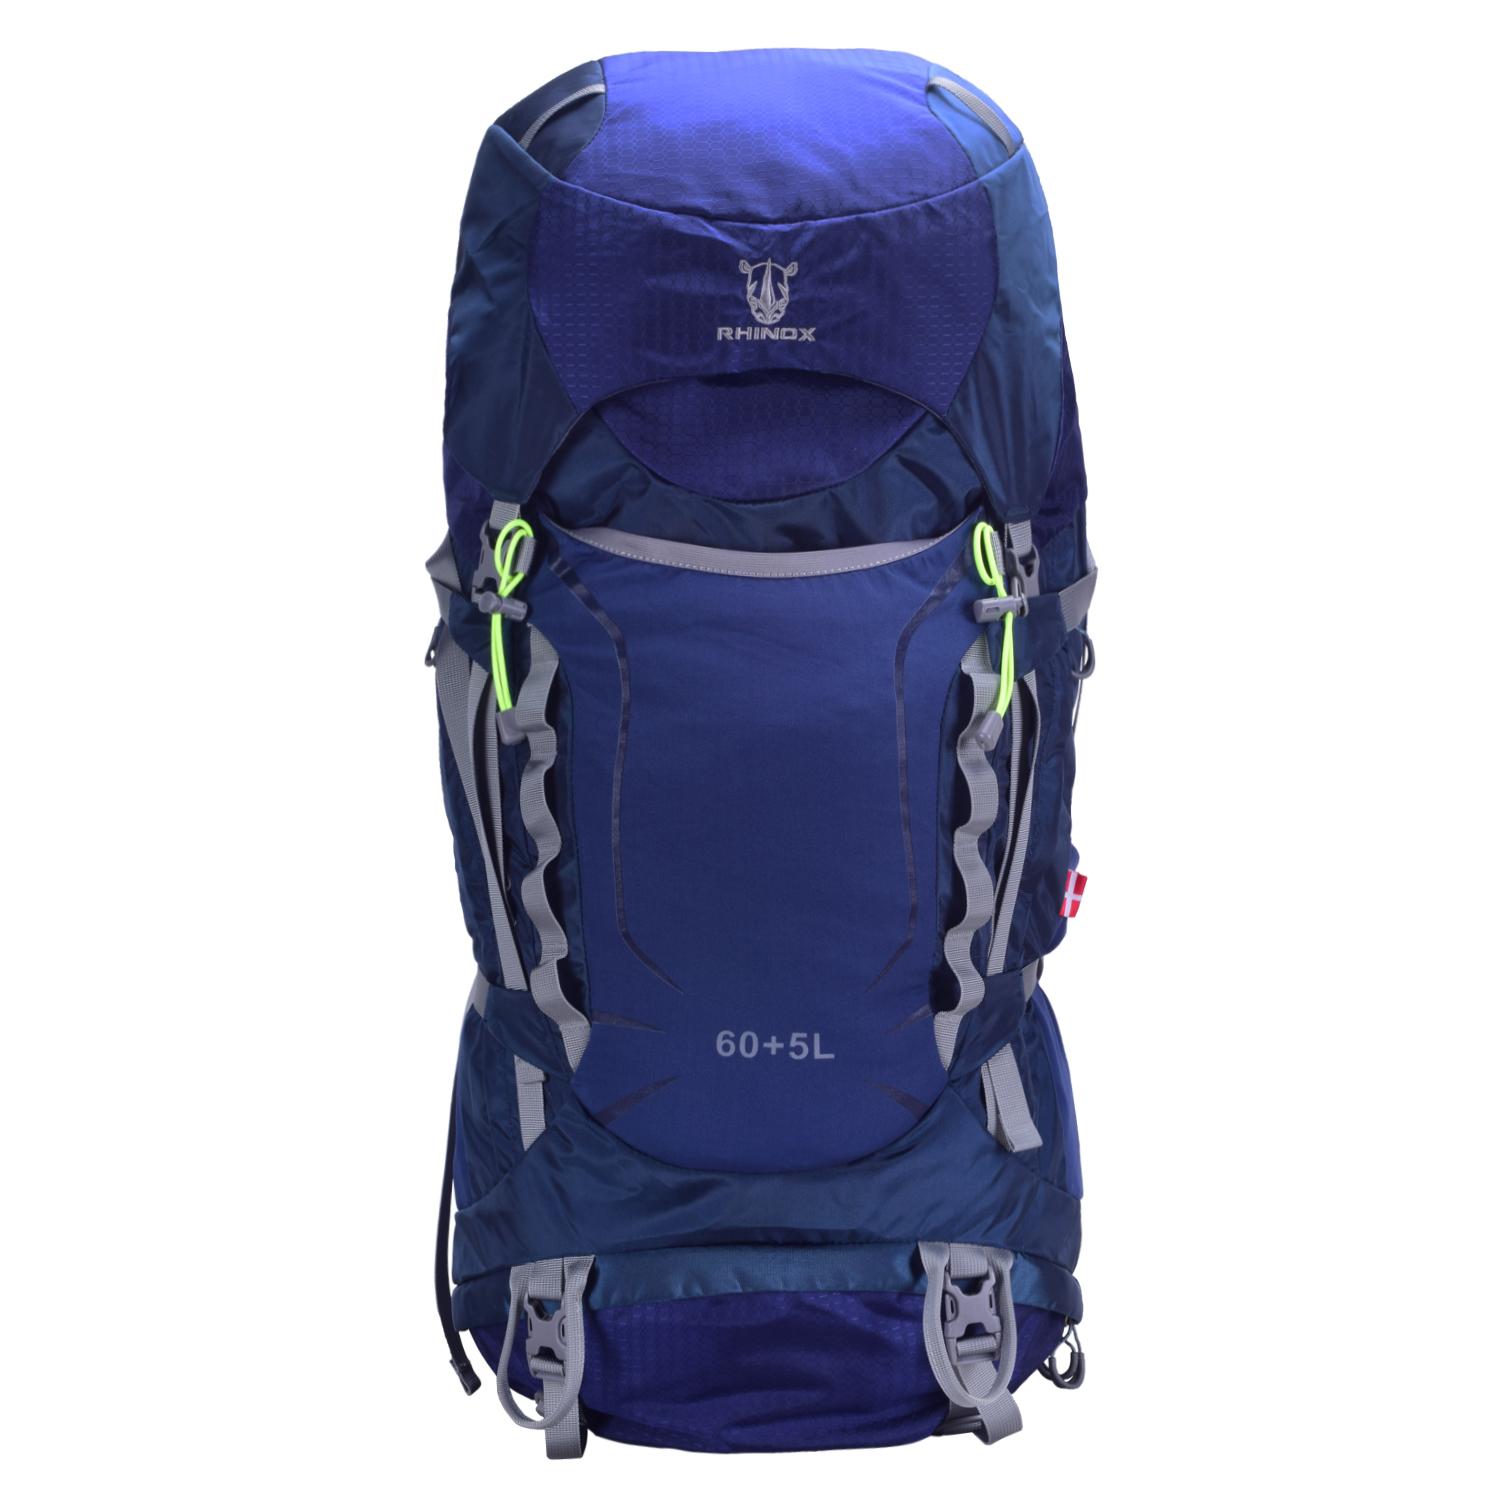 mountaineering bag for sale philippines